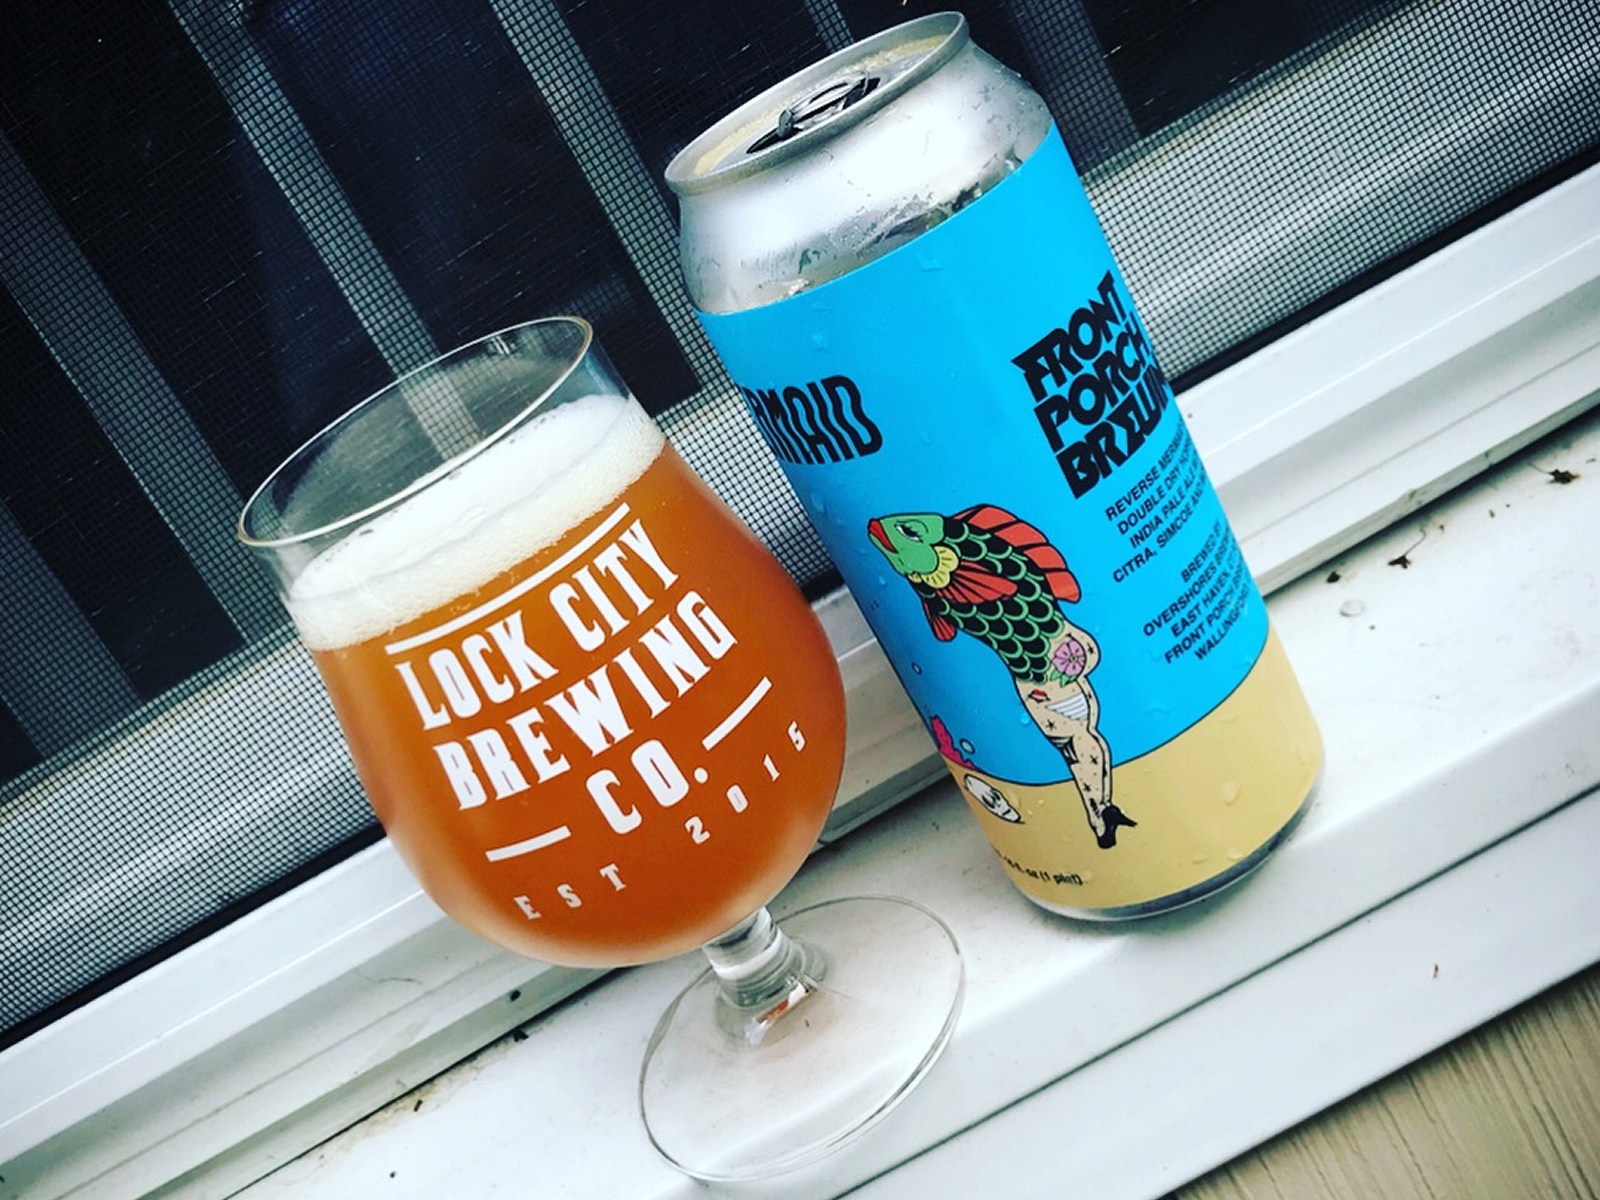 Front Porch Brewery: Reverse Mermaid